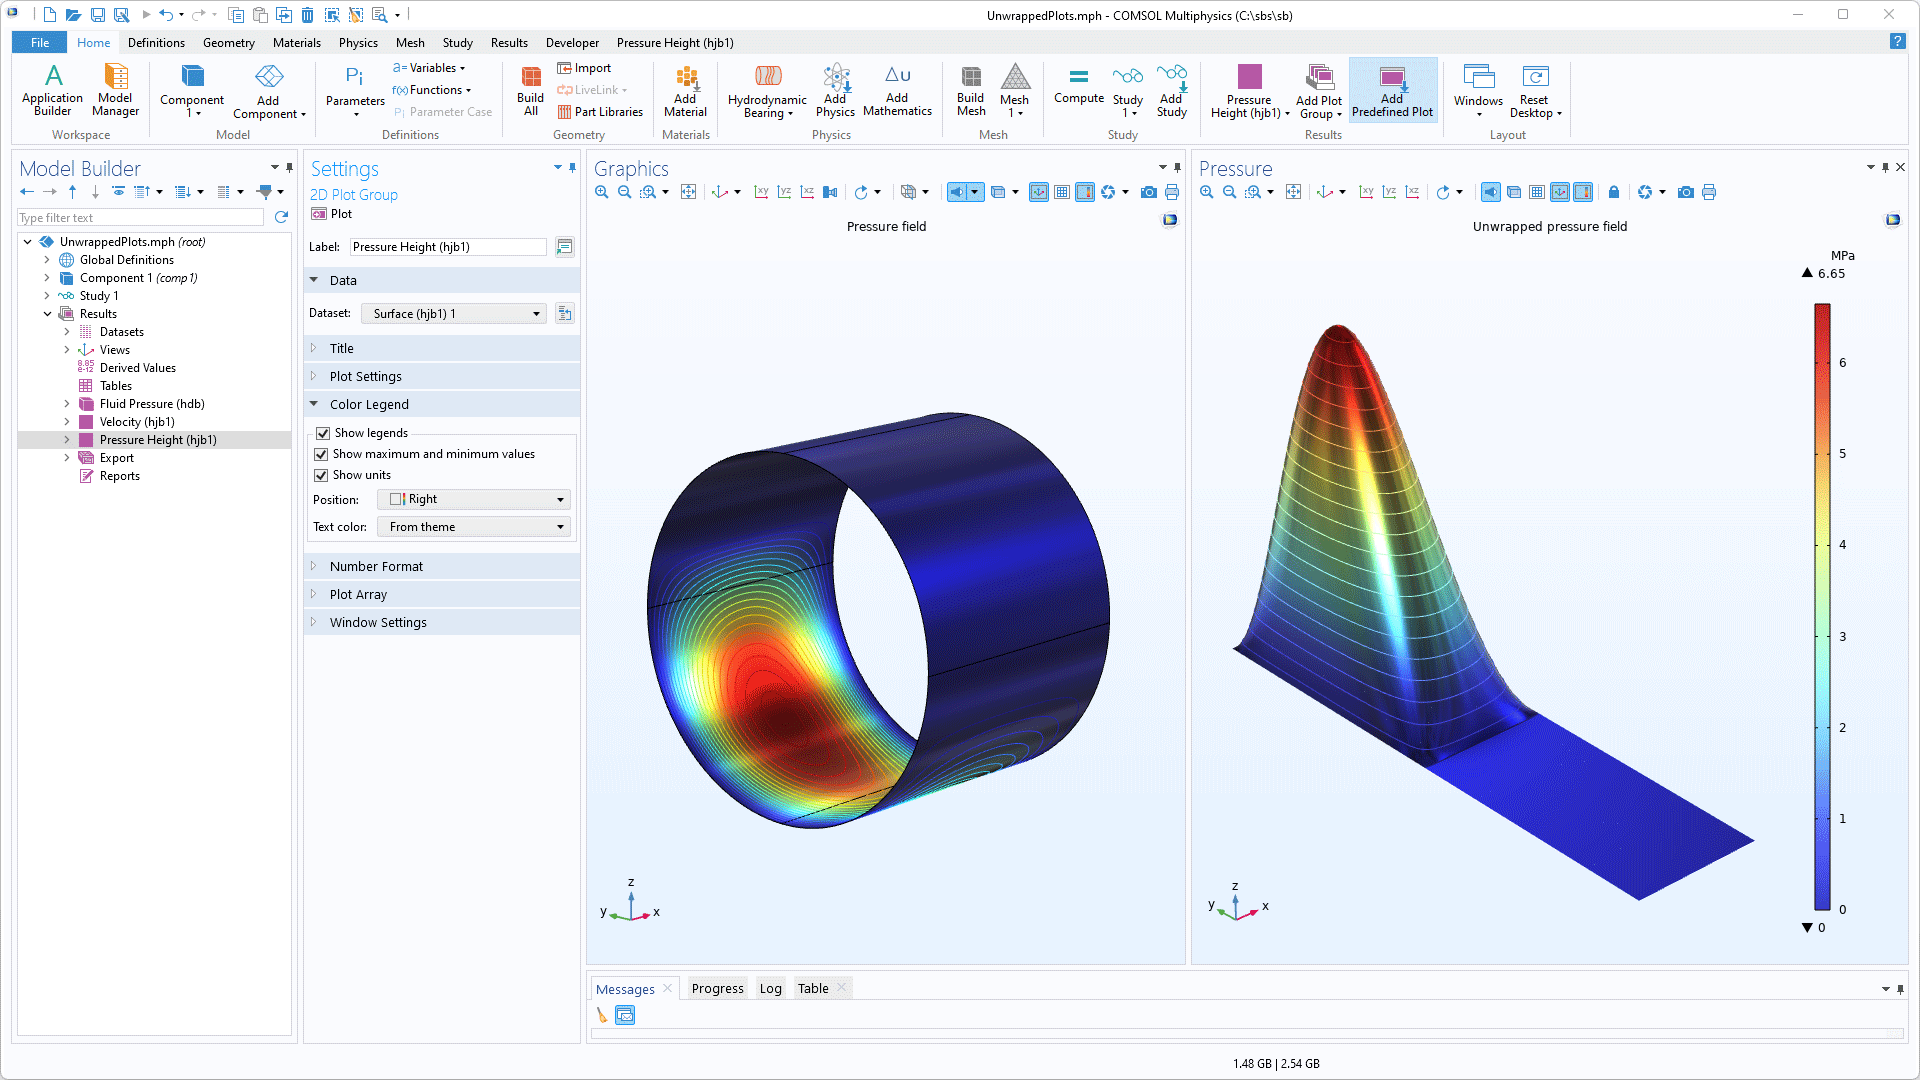 The COMSOL Multiphysics UI showing the Model Builder with a 2D Plot Group node highlighted, the corresponding Settings window, and two Graphics windows.